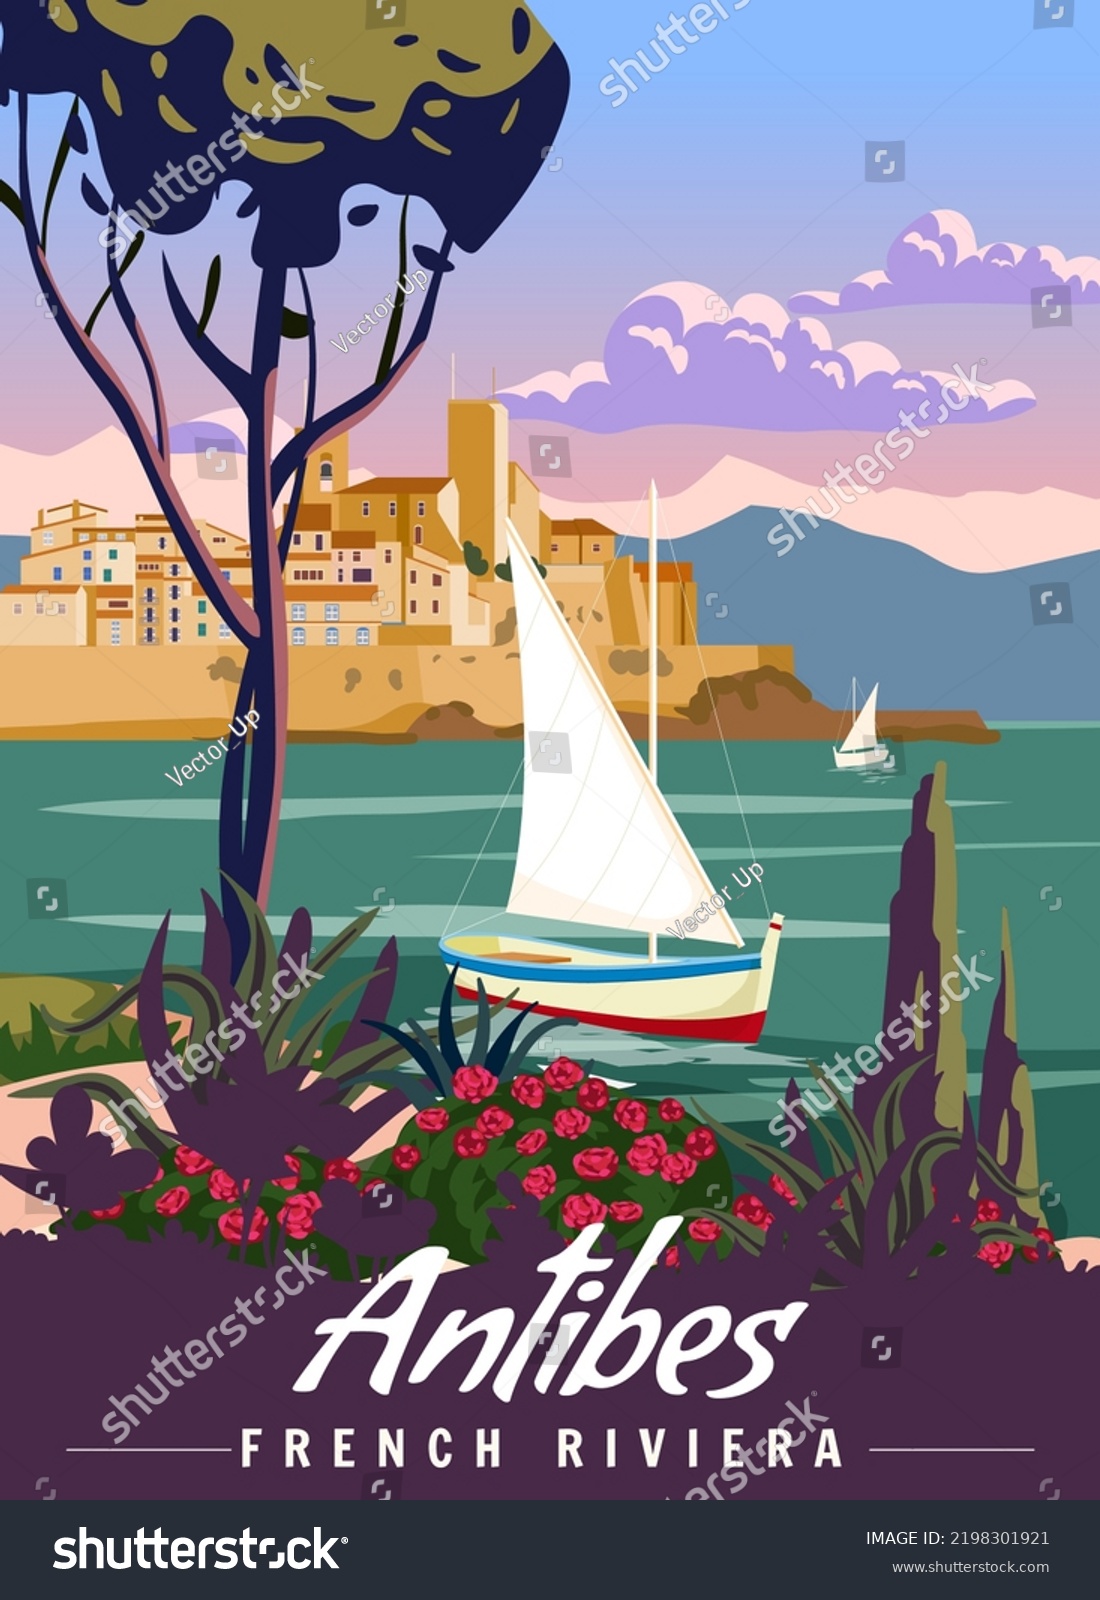 French Riviera Antibes Retro Poster Tropical Stock Vector (Royalty Free ...